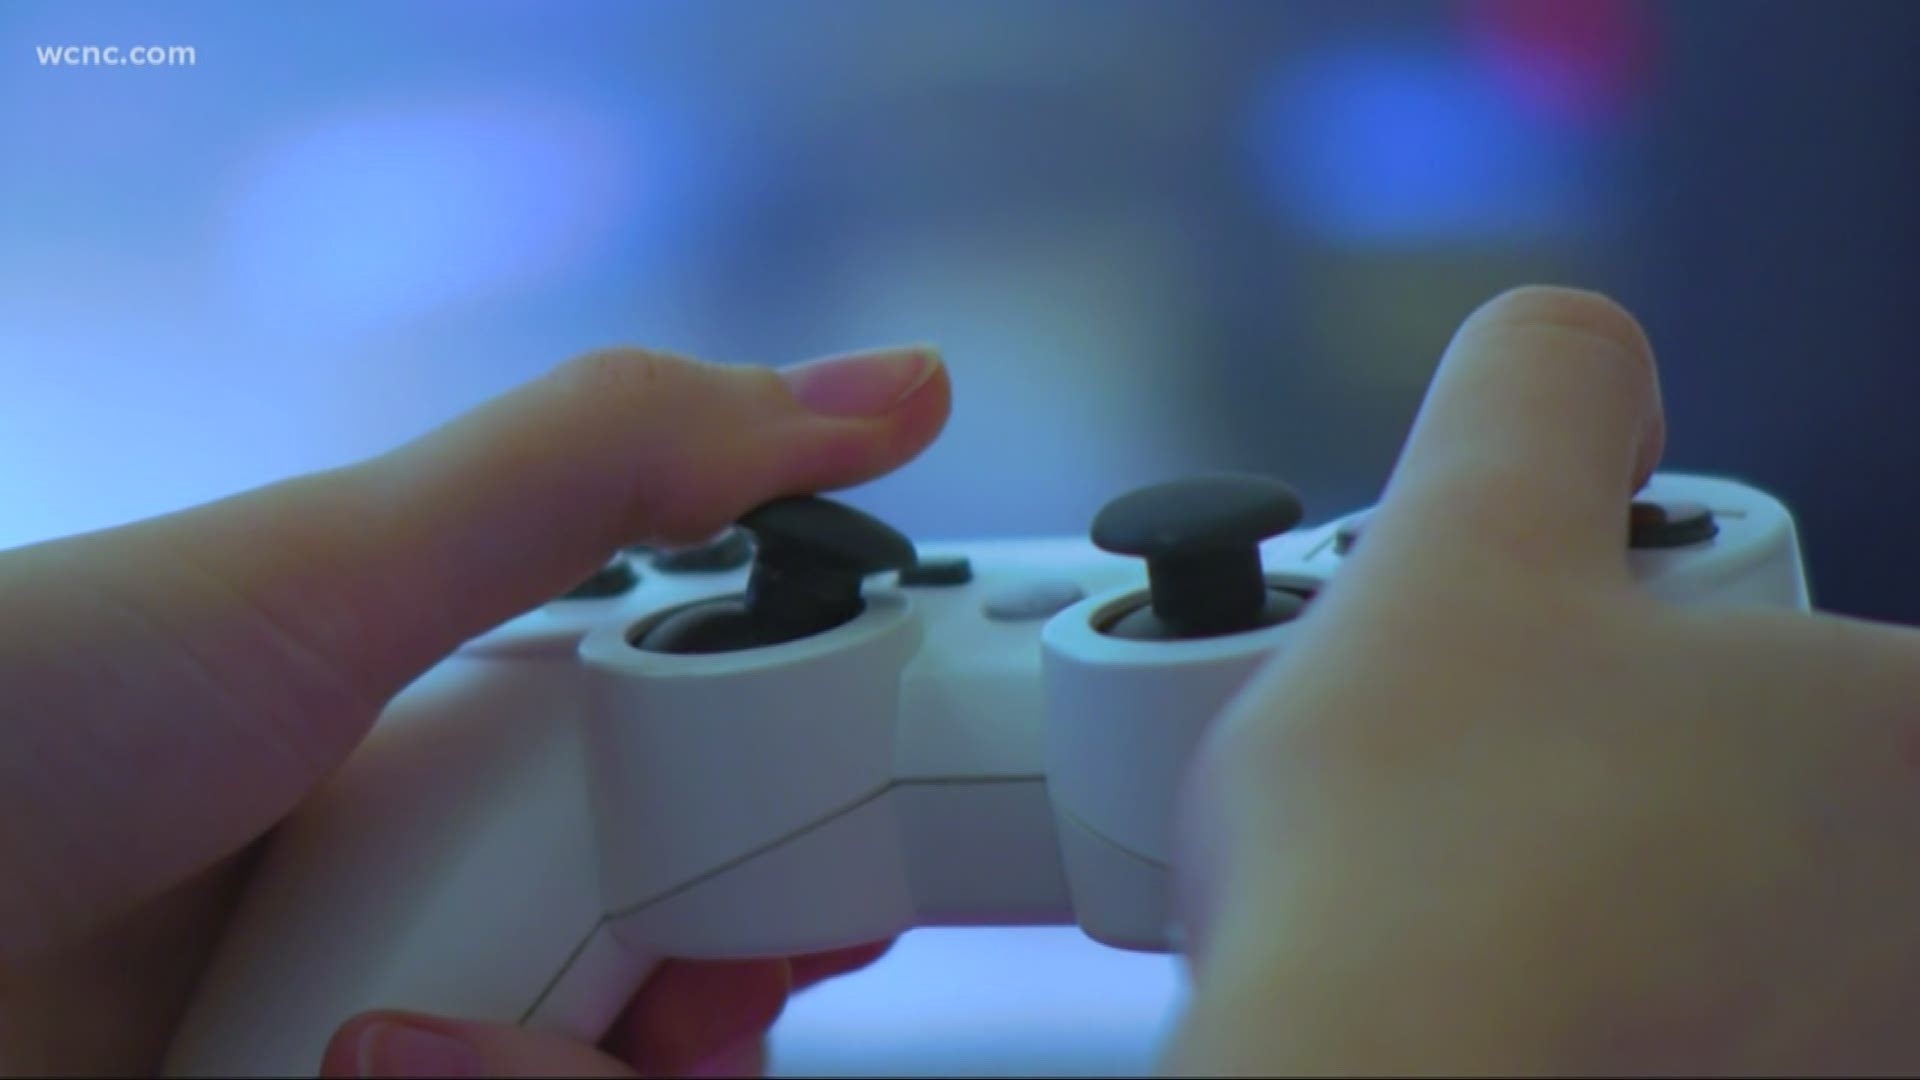 A new study from BYU found that playing video games with coworkers makes us better communicators and increases productivity.